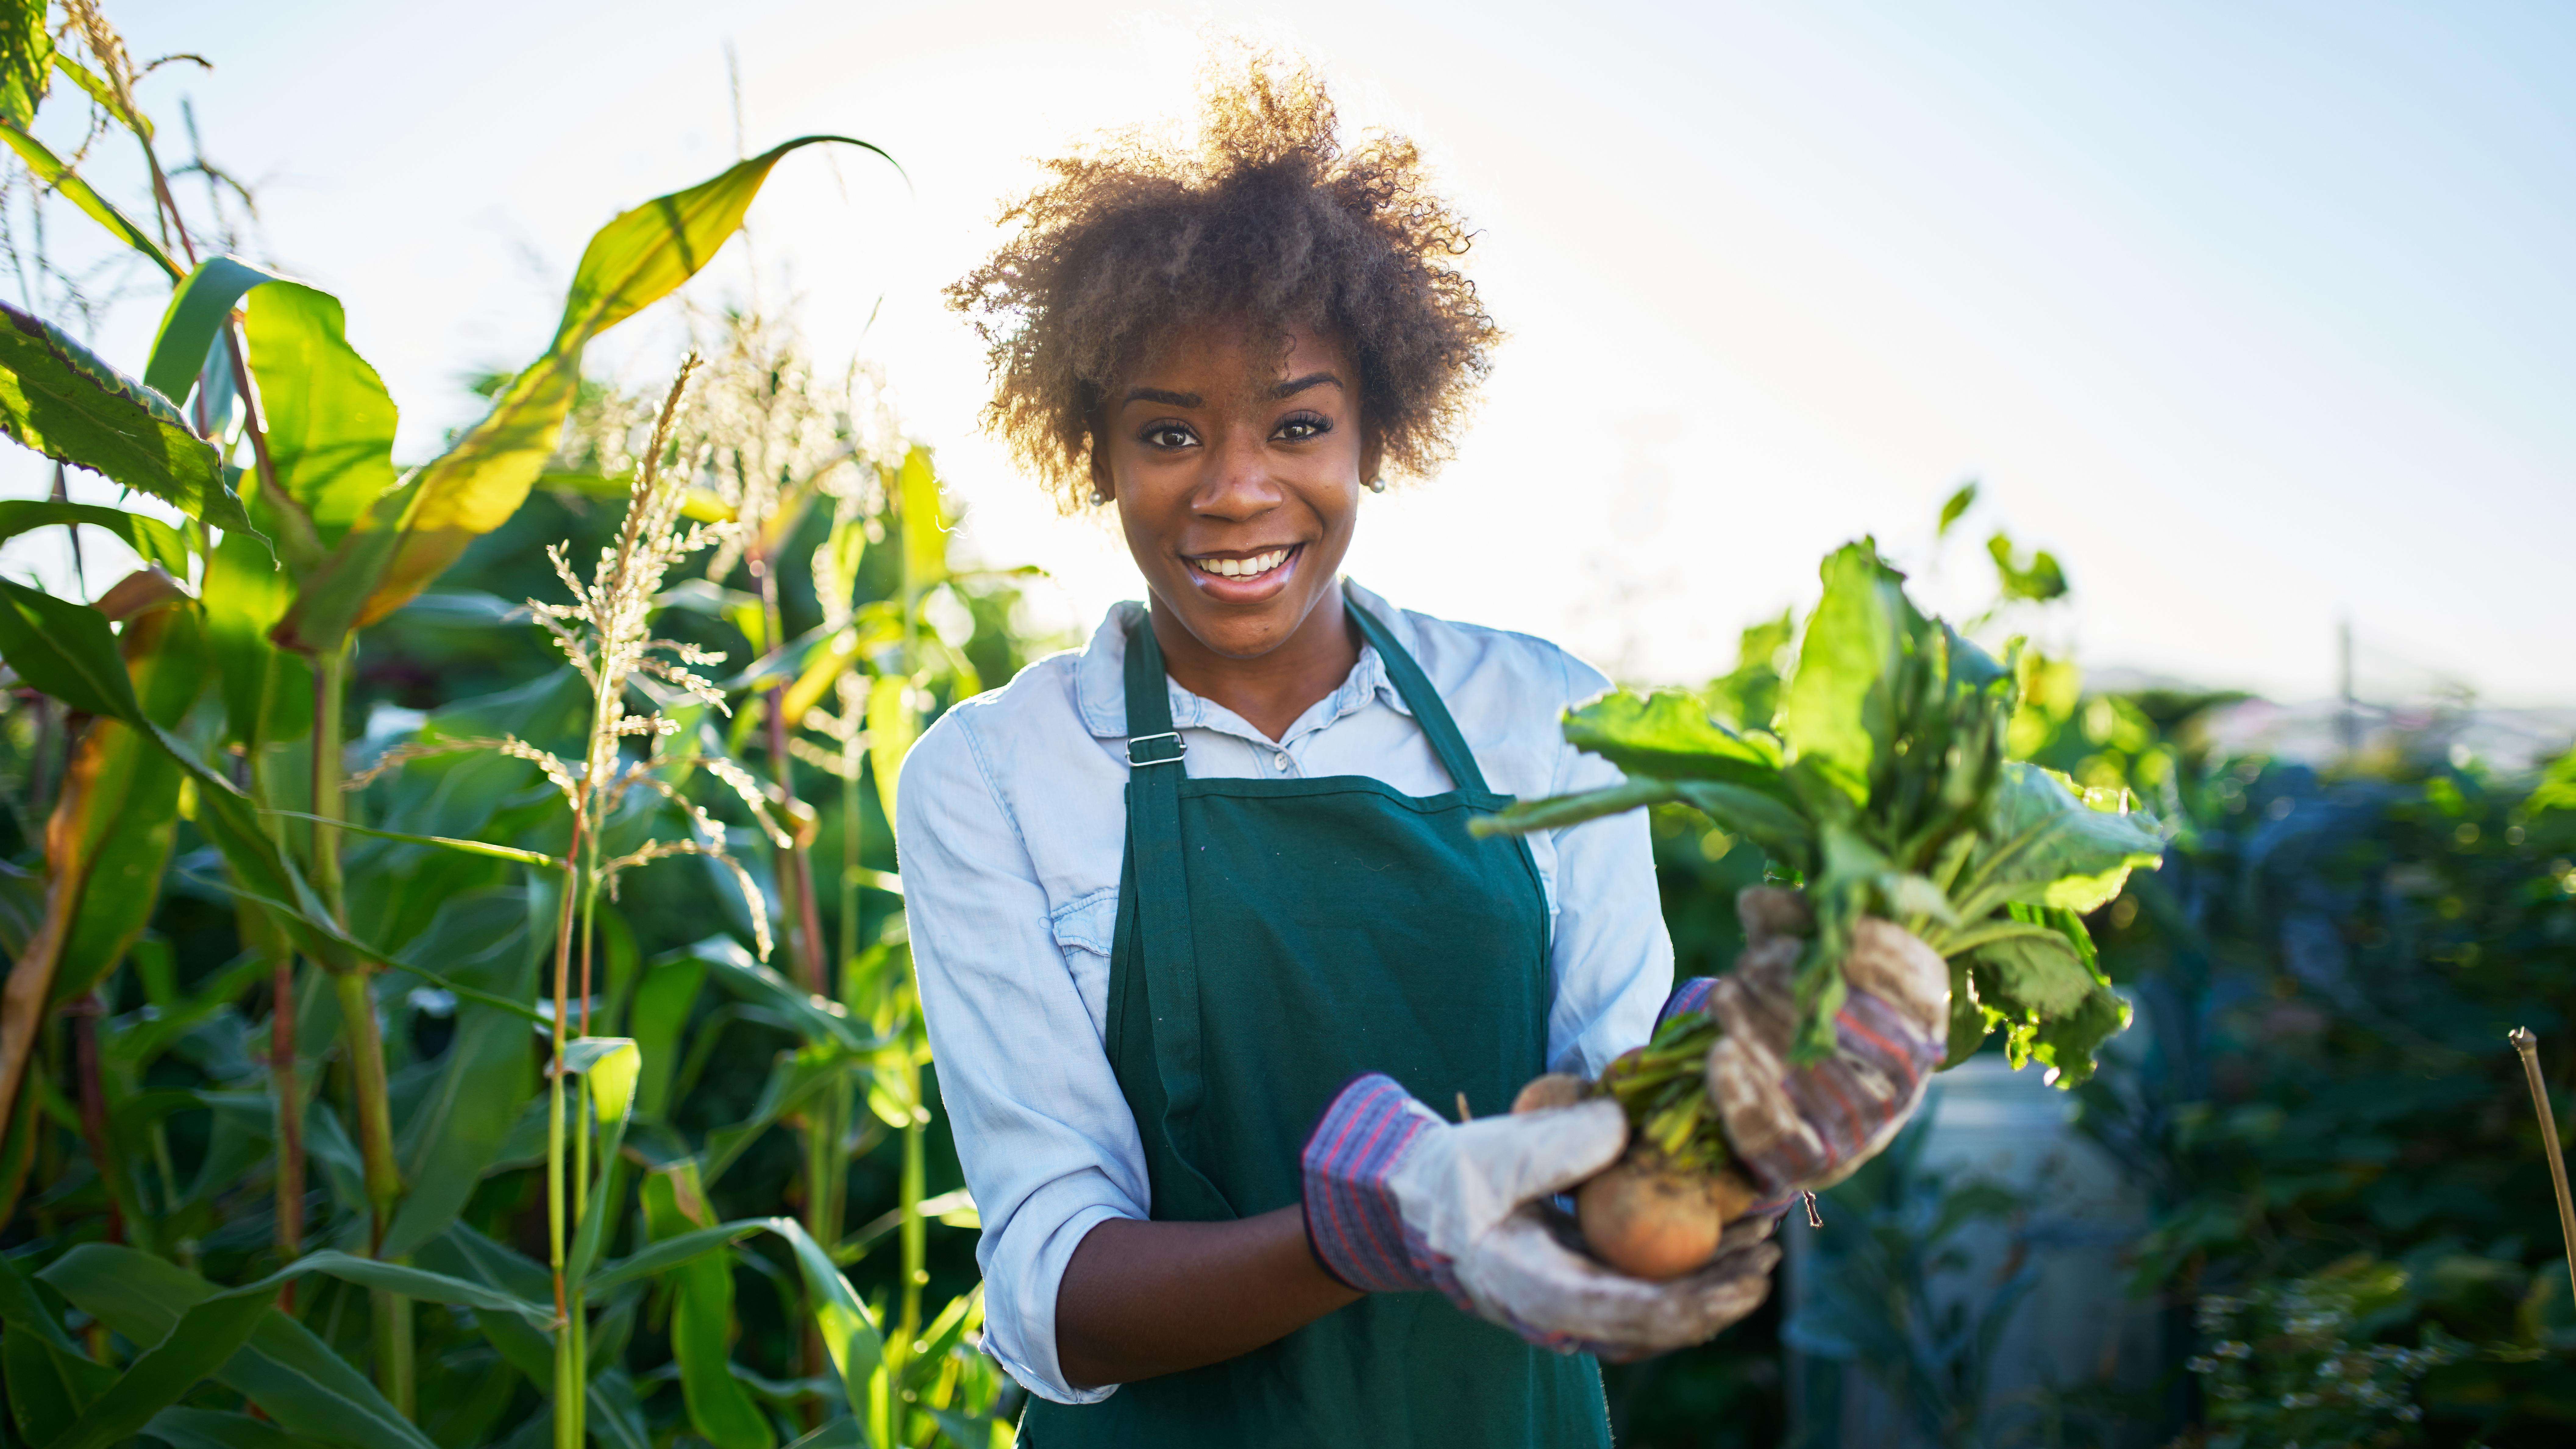 photo of a woman in an agricultural field holding a plant